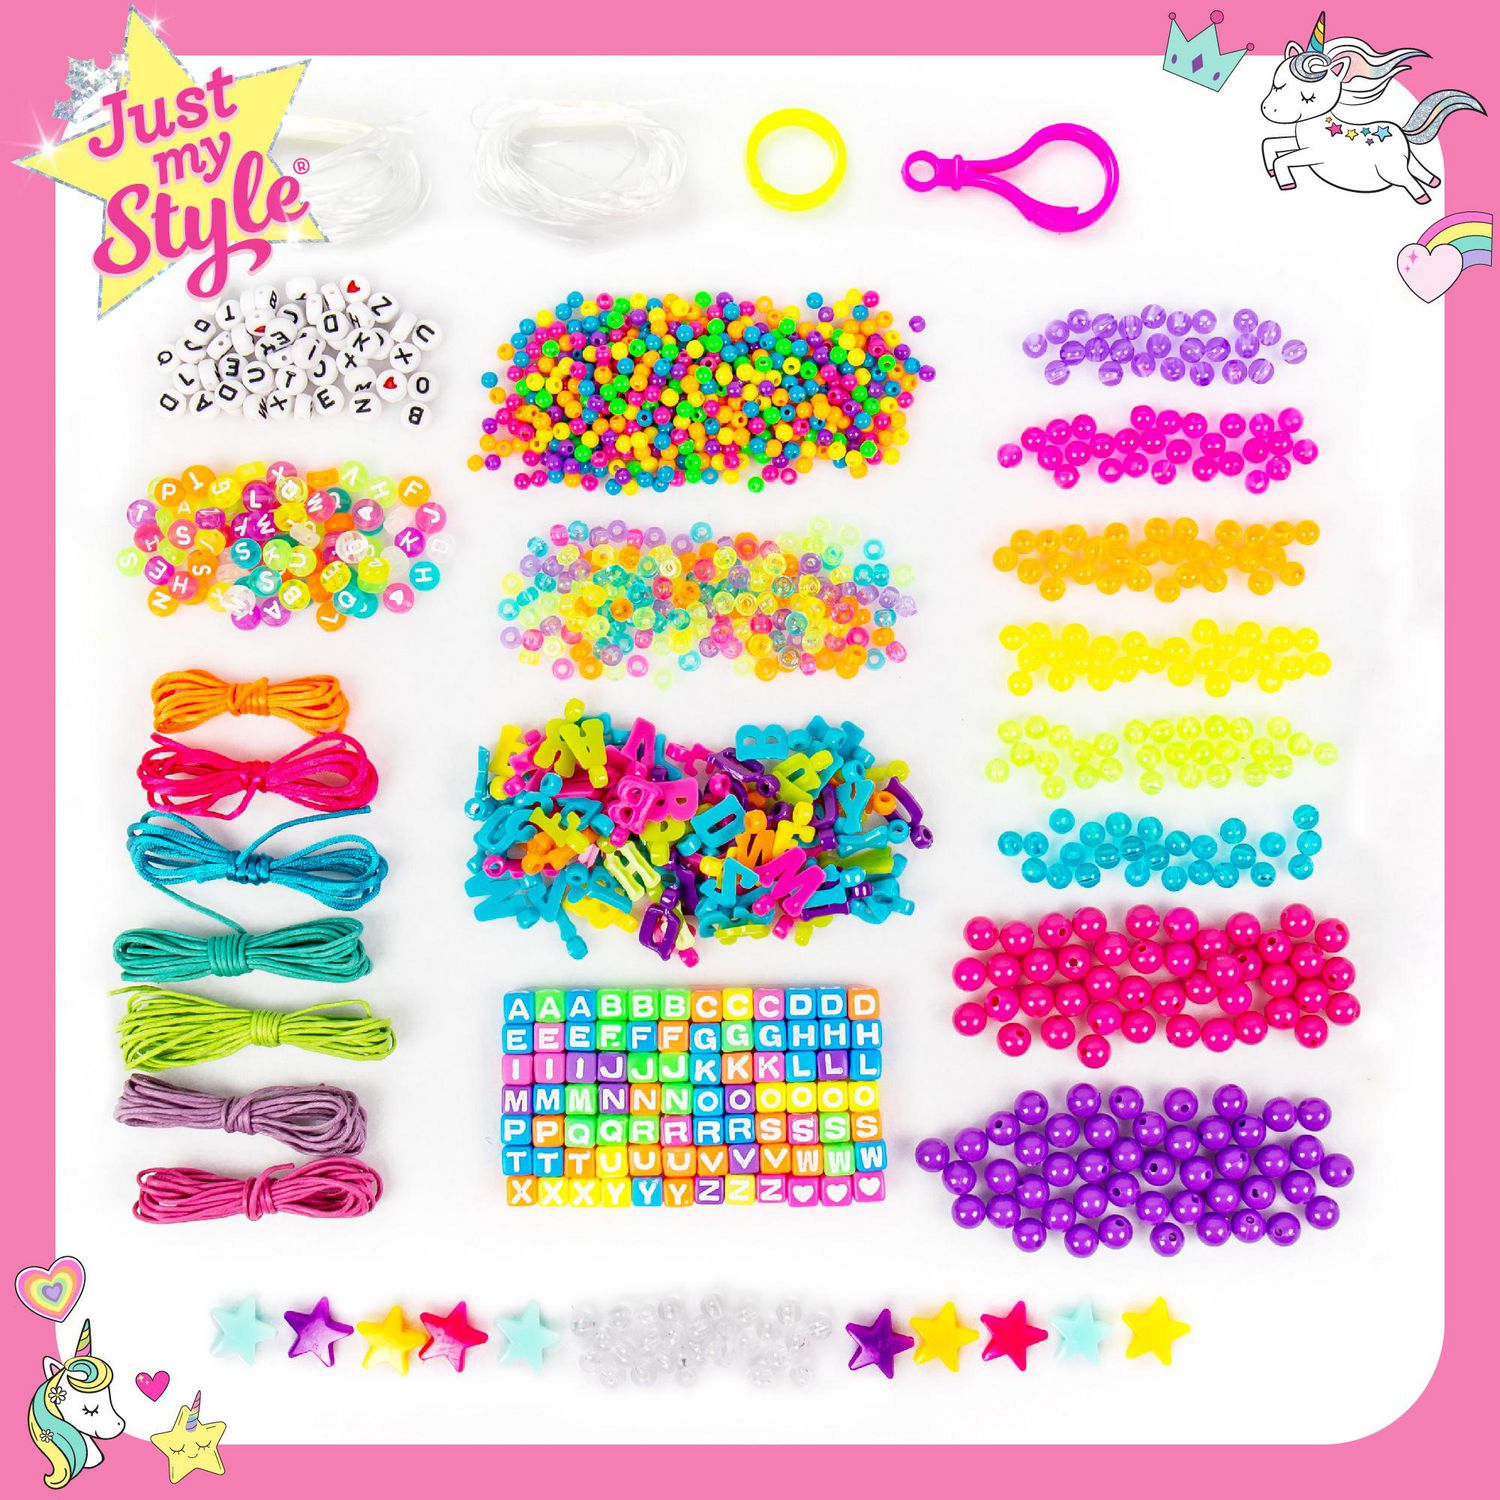 Qenwkxz 1000PCS 4mm Crystal Glass Beads 10 Colors Finding Spacer Beads  Bicone Shaped Faceted Bead with Box for Jewelry Bracelets, Necklaces,  Earrings Making - Walmart.com